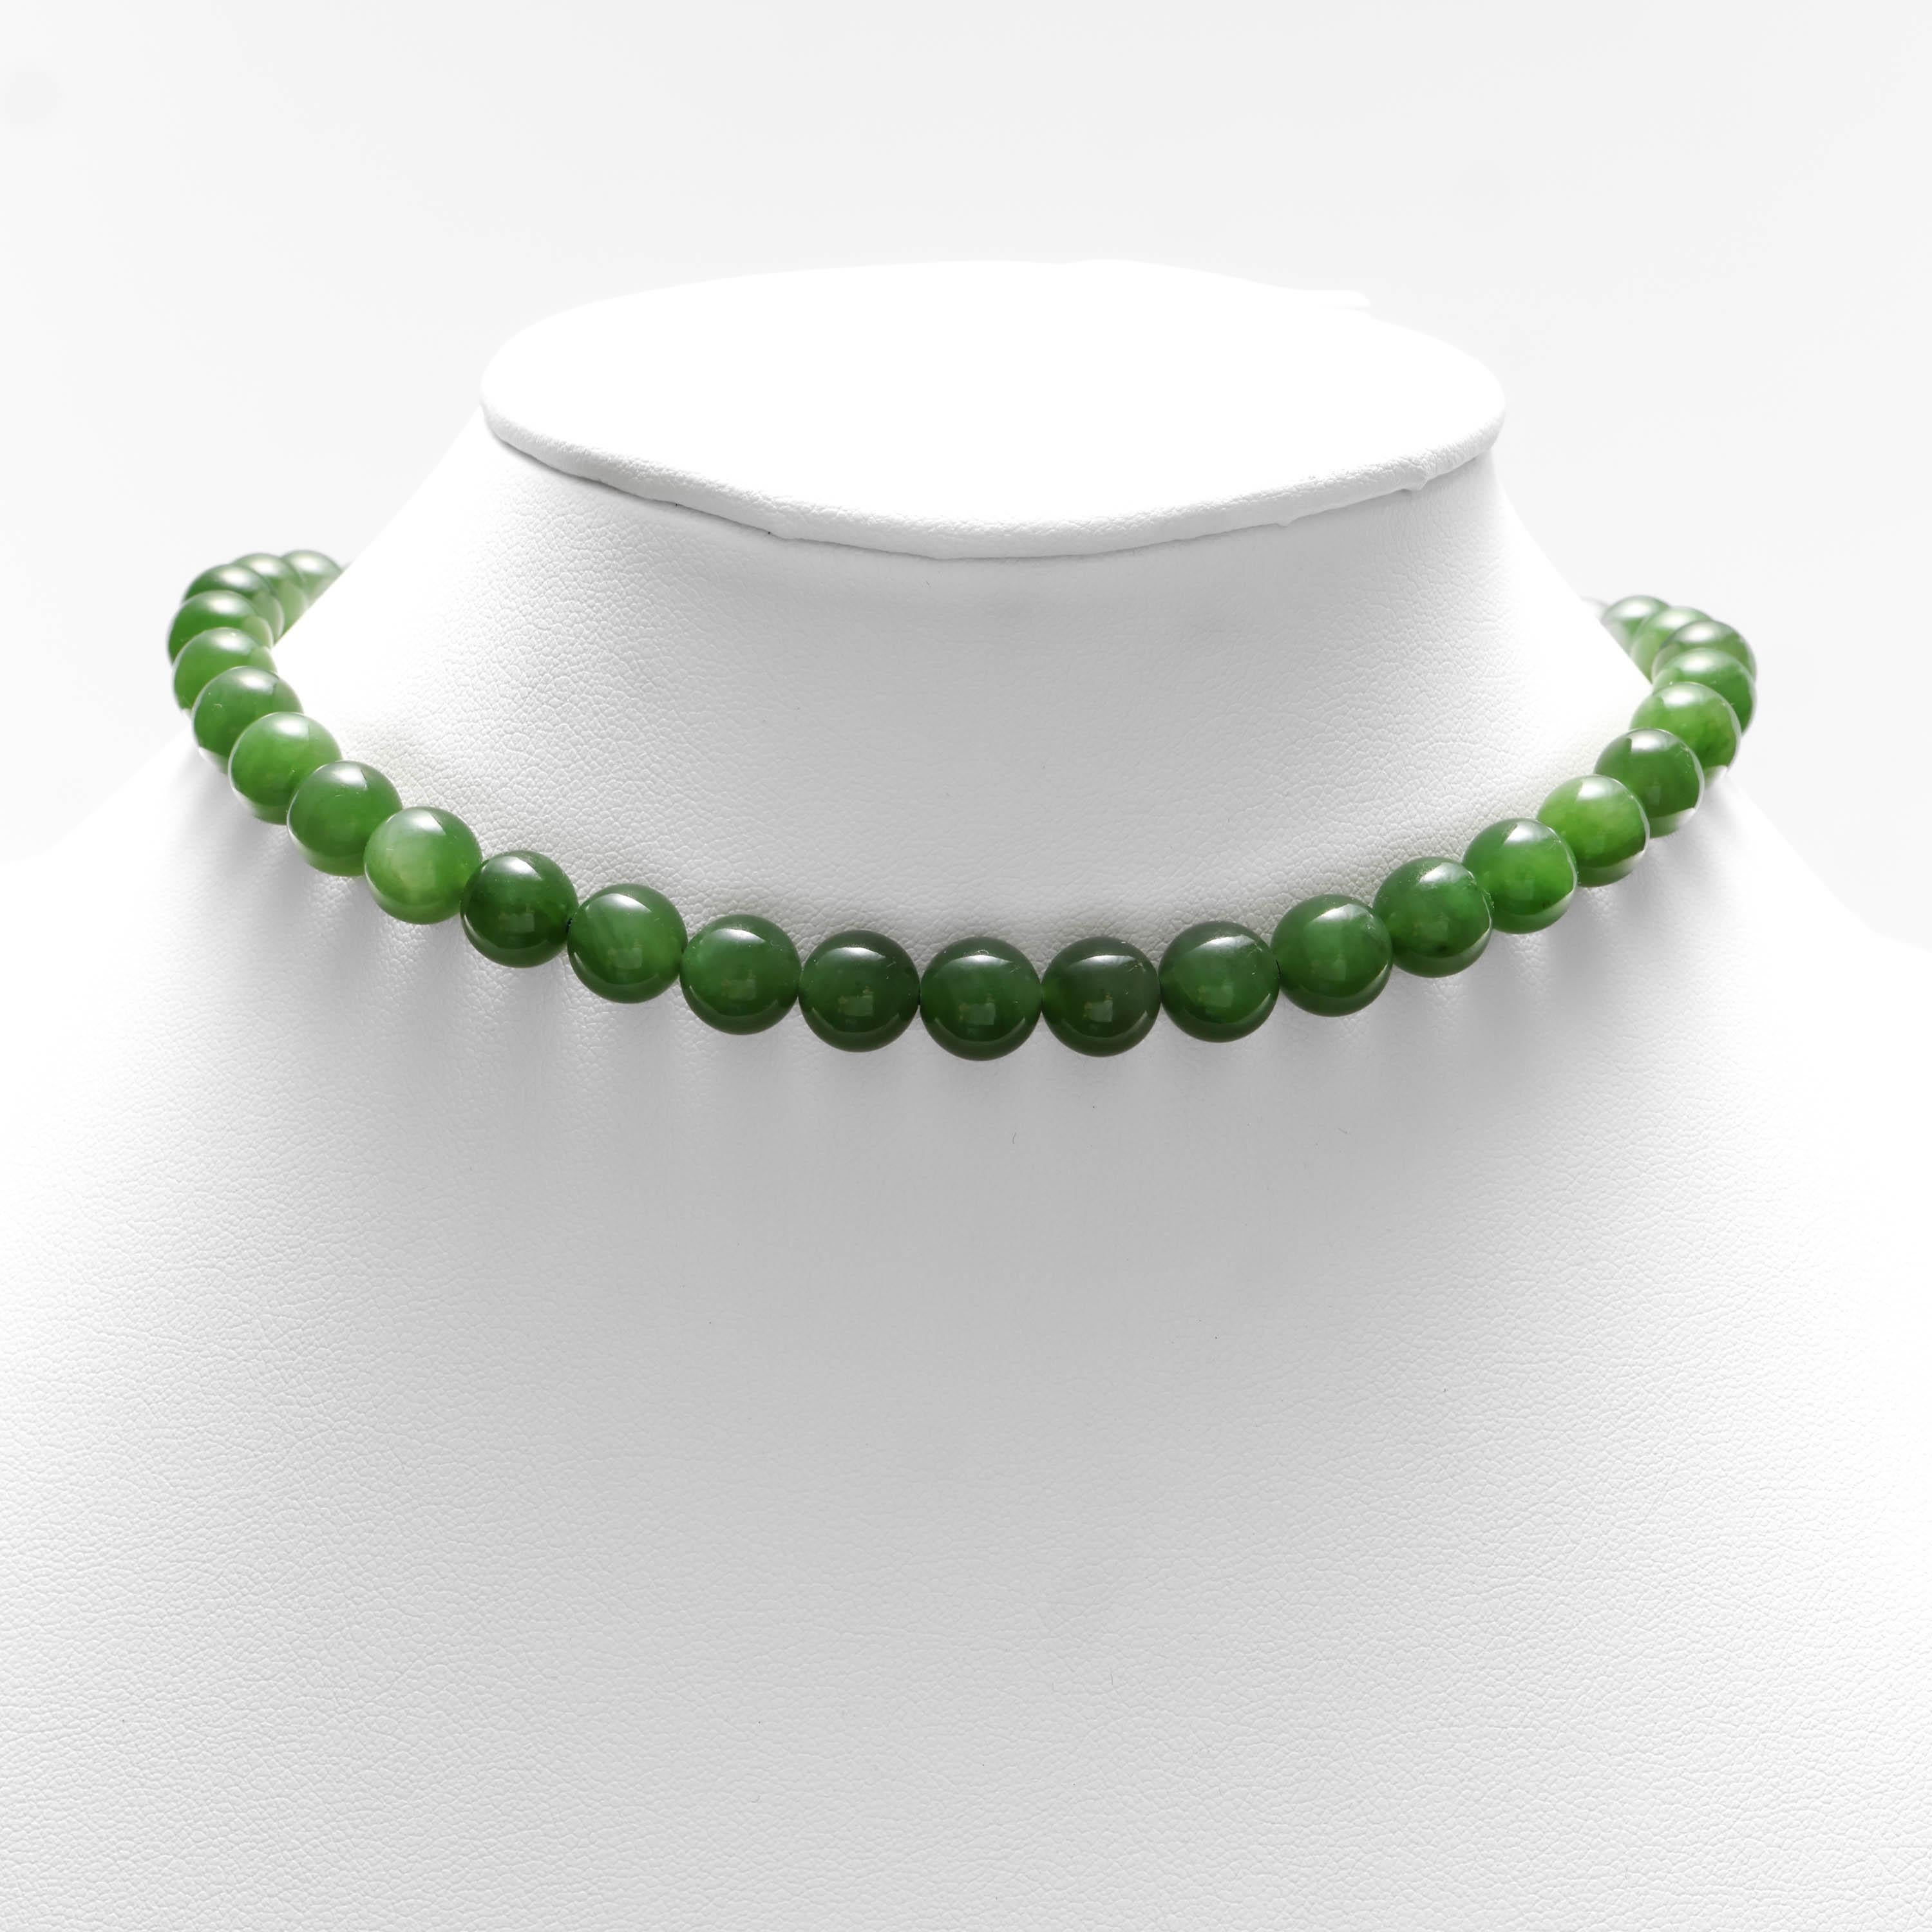 Bead Nephrite Jade Necklace Hand Crafted Certified Untreated For Sale